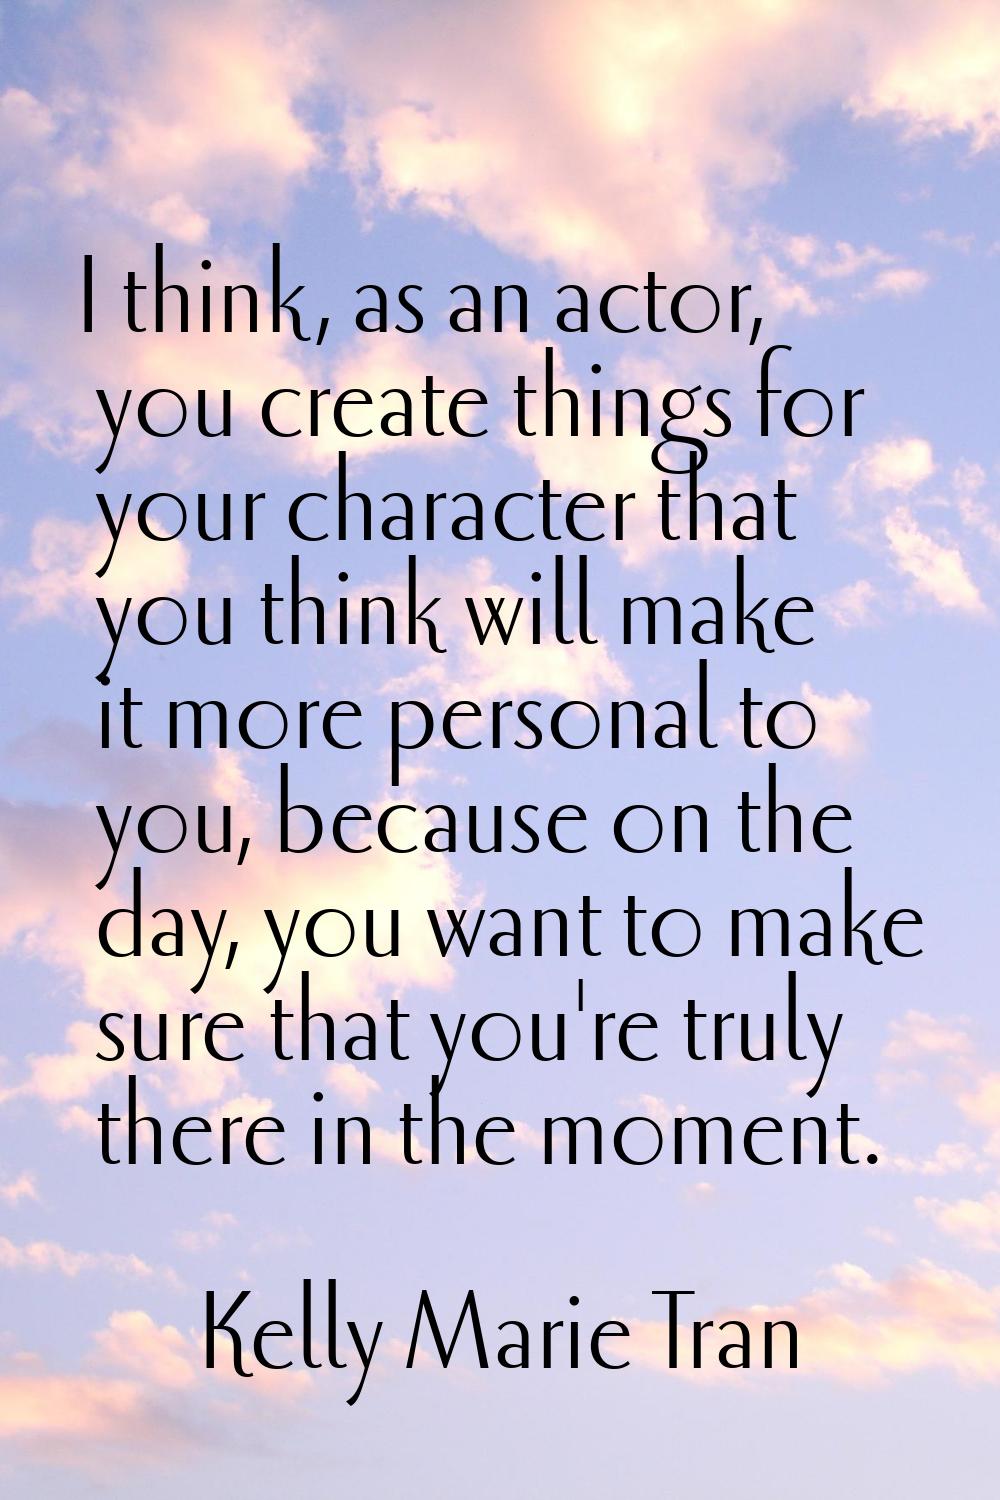 I think, as an actor, you create things for your character that you think will make it more persona